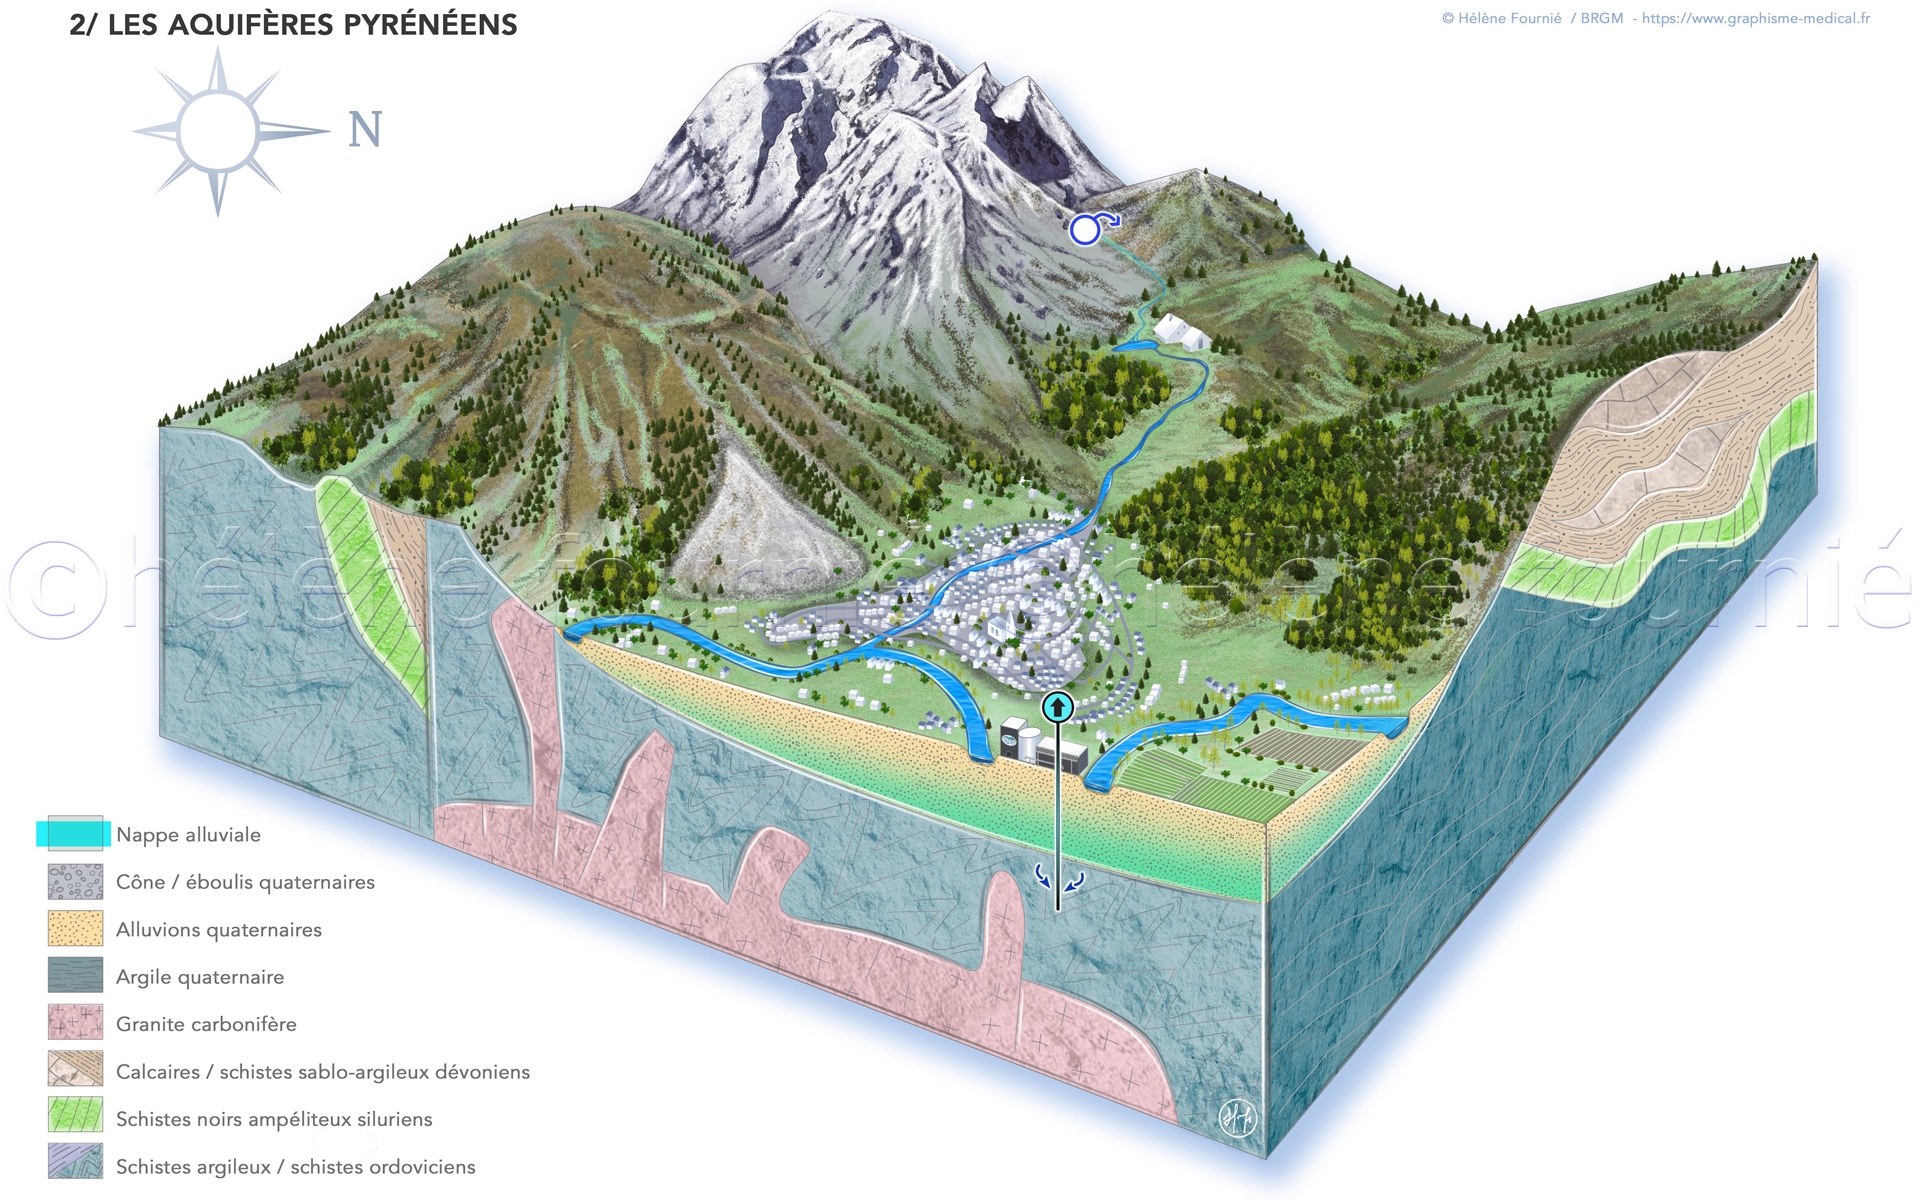 Hydrogeological synthesis of the Pyrenees